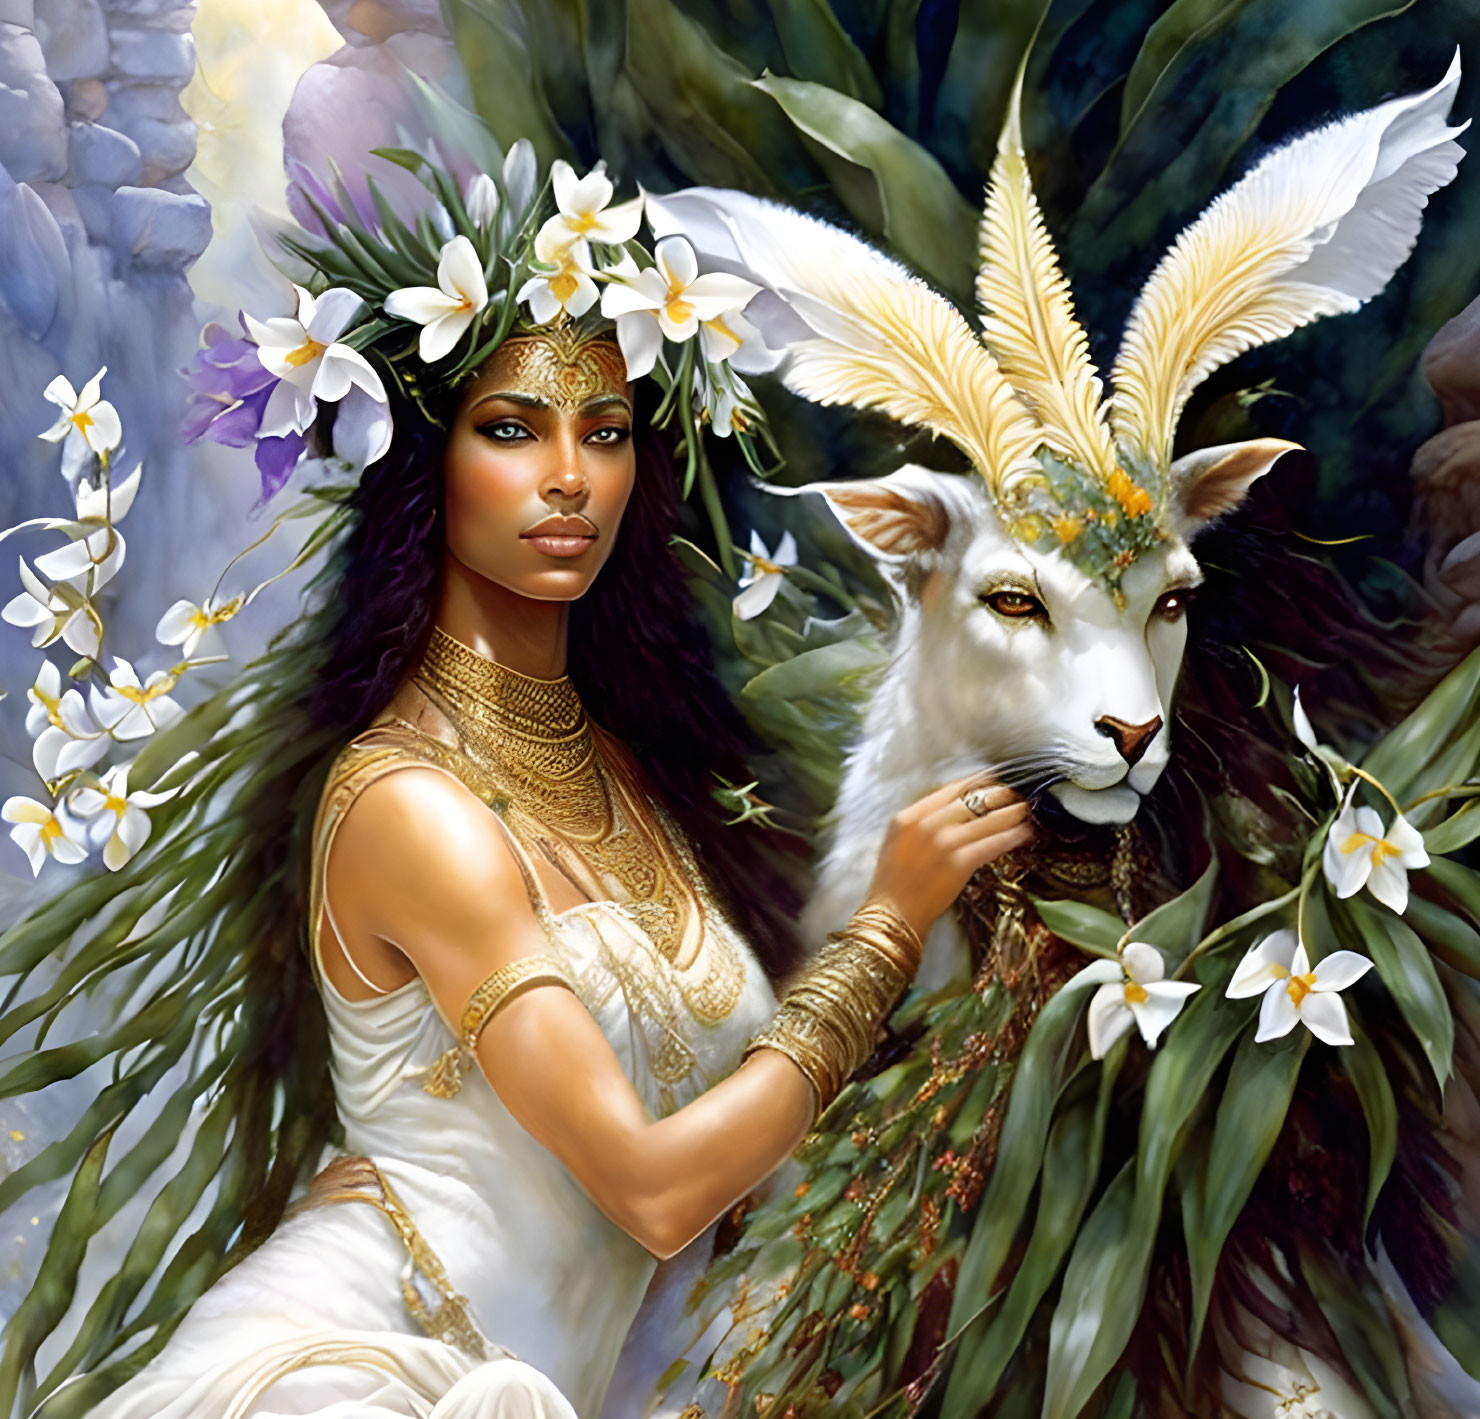 Woman with floral adornments and mystical white goat creature in lush flora.